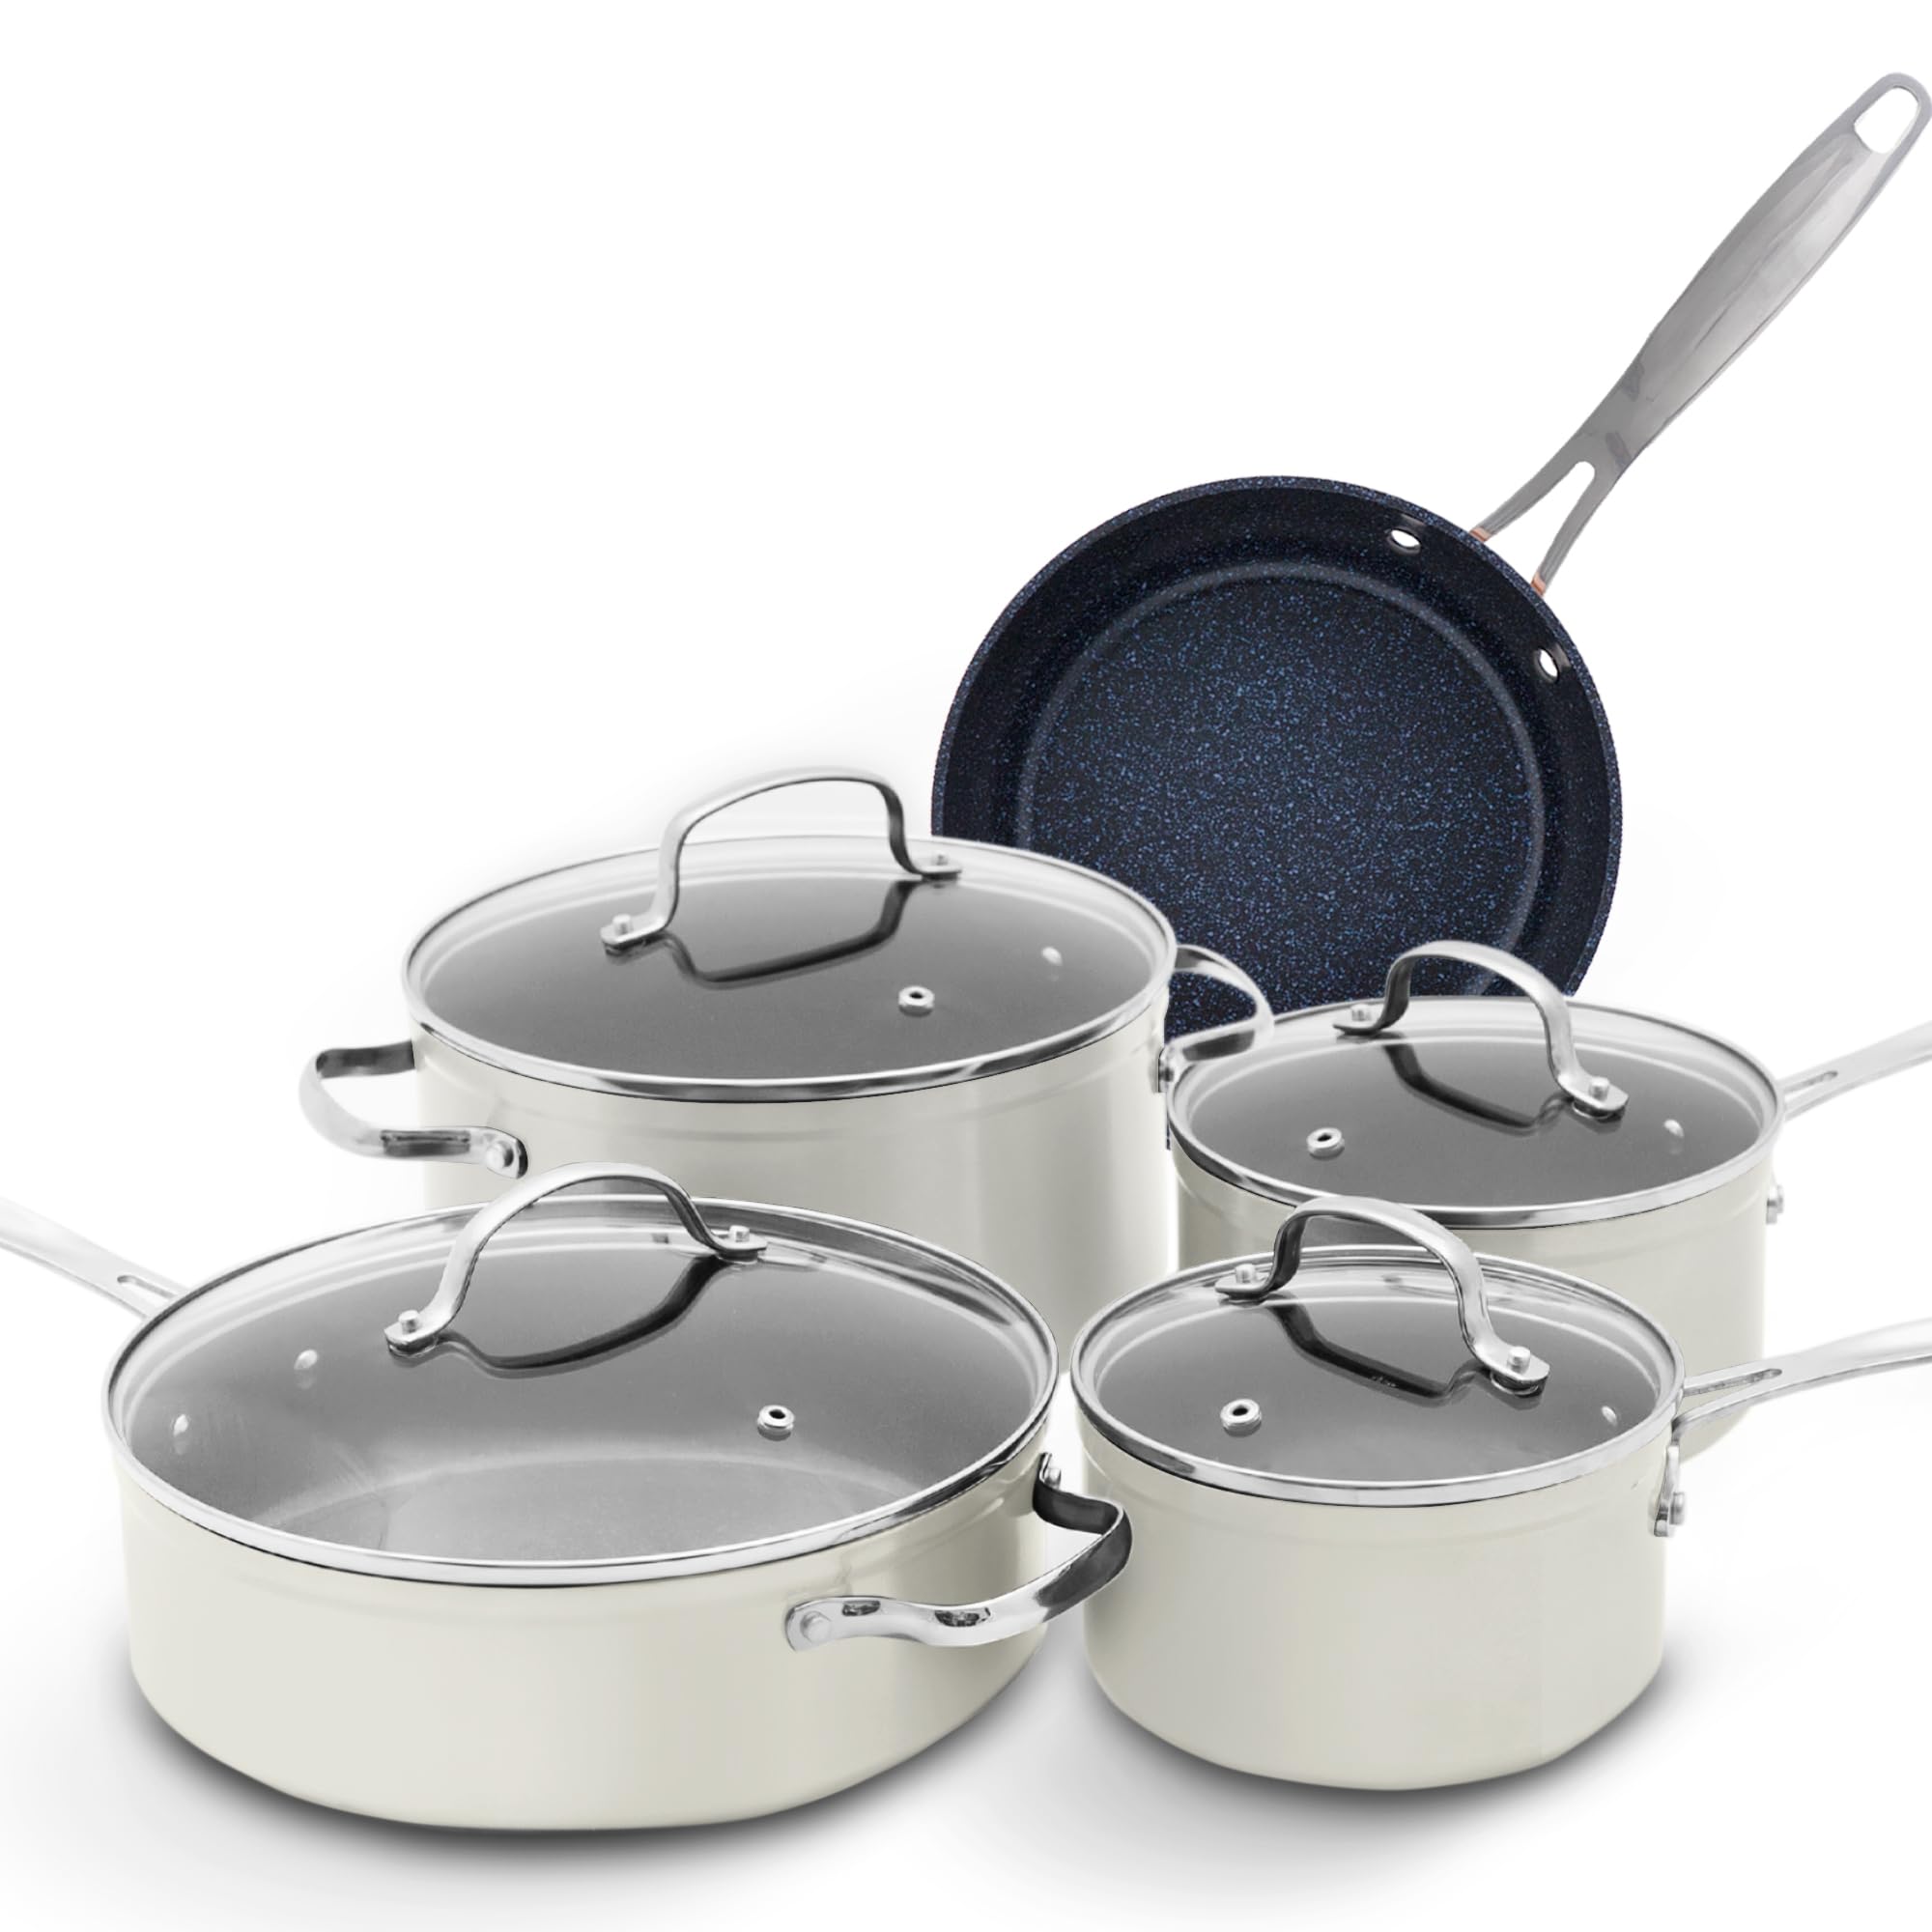 Nuwave 9pc Cookware Set Healthy Duralon Blue Ceramic Nonstick Coated, Diamond Infused Scratch-Resistant, PTFE & PFOA Free, Oven Safe, Induction Ready & Evenly Heats, Tempered Glass Lids & Stay-Cool Ha